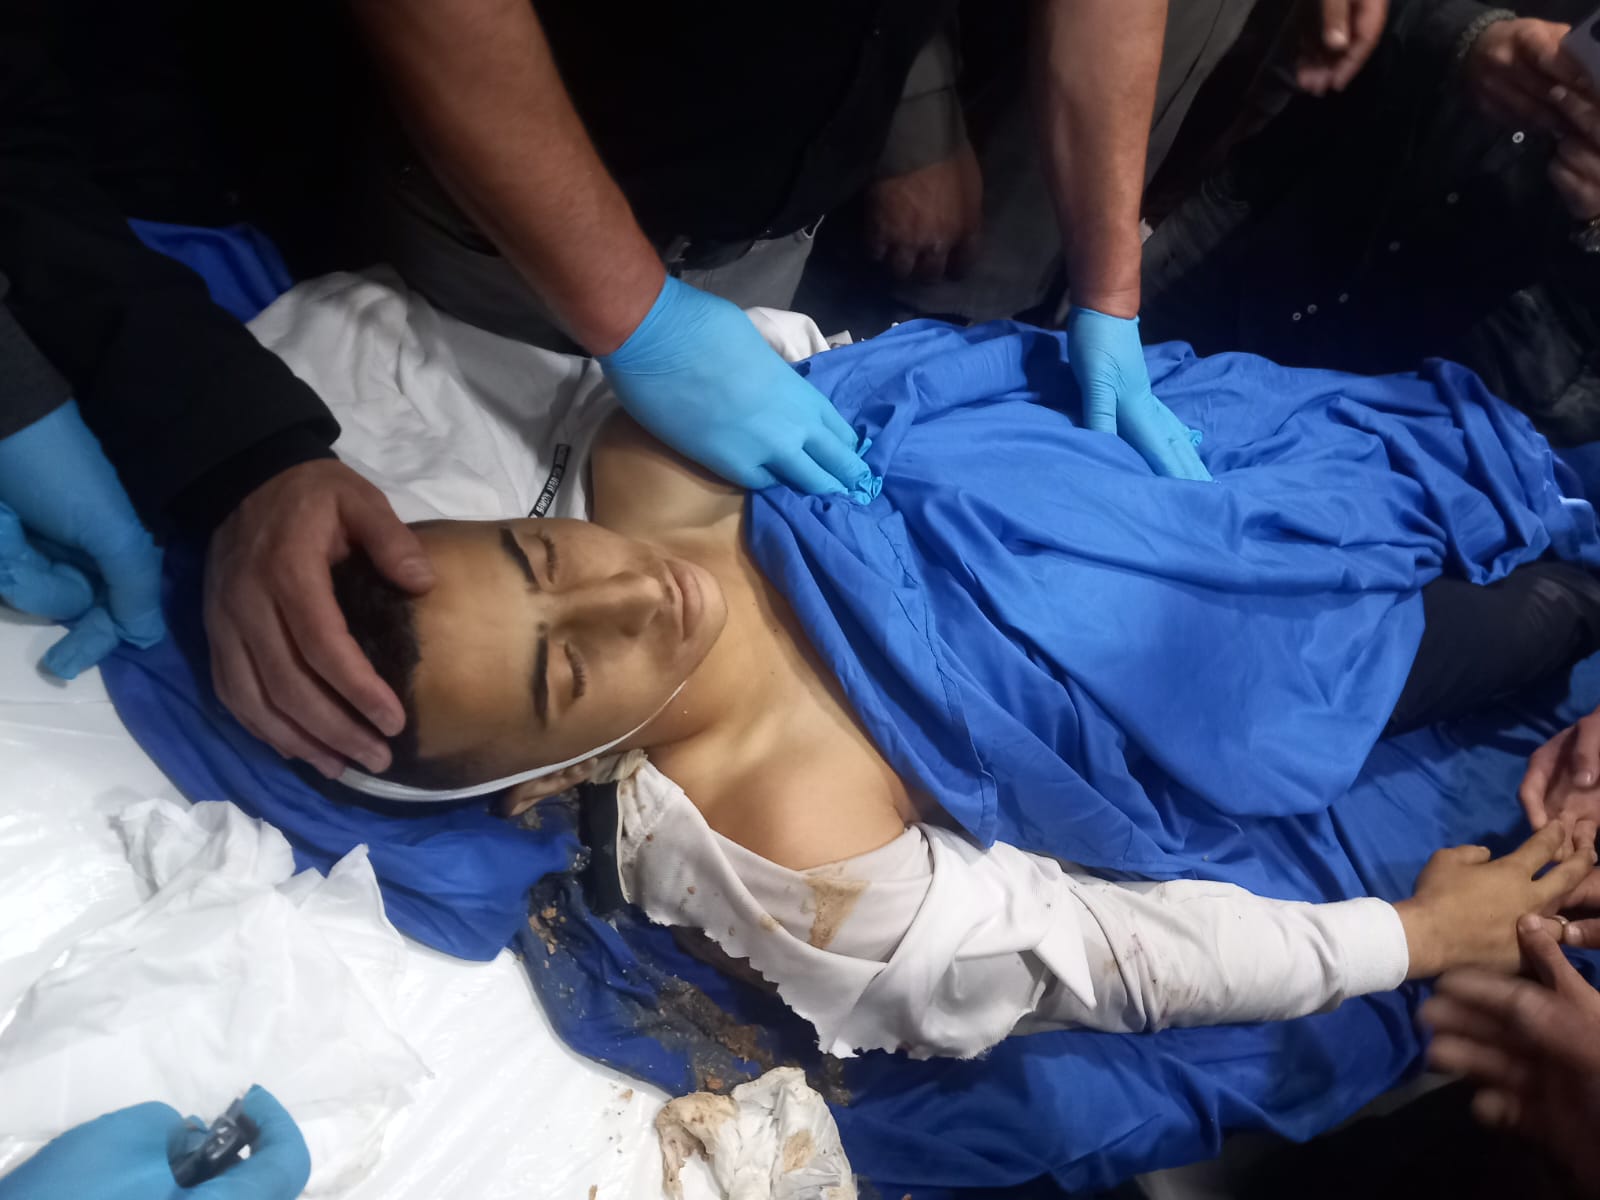 Israeli occupation forces IOF shot dead a Palestinian teen in Taqu town, southeast of the occupied West Bank city of Bethlehem on Friday evening, April 28, 2023.